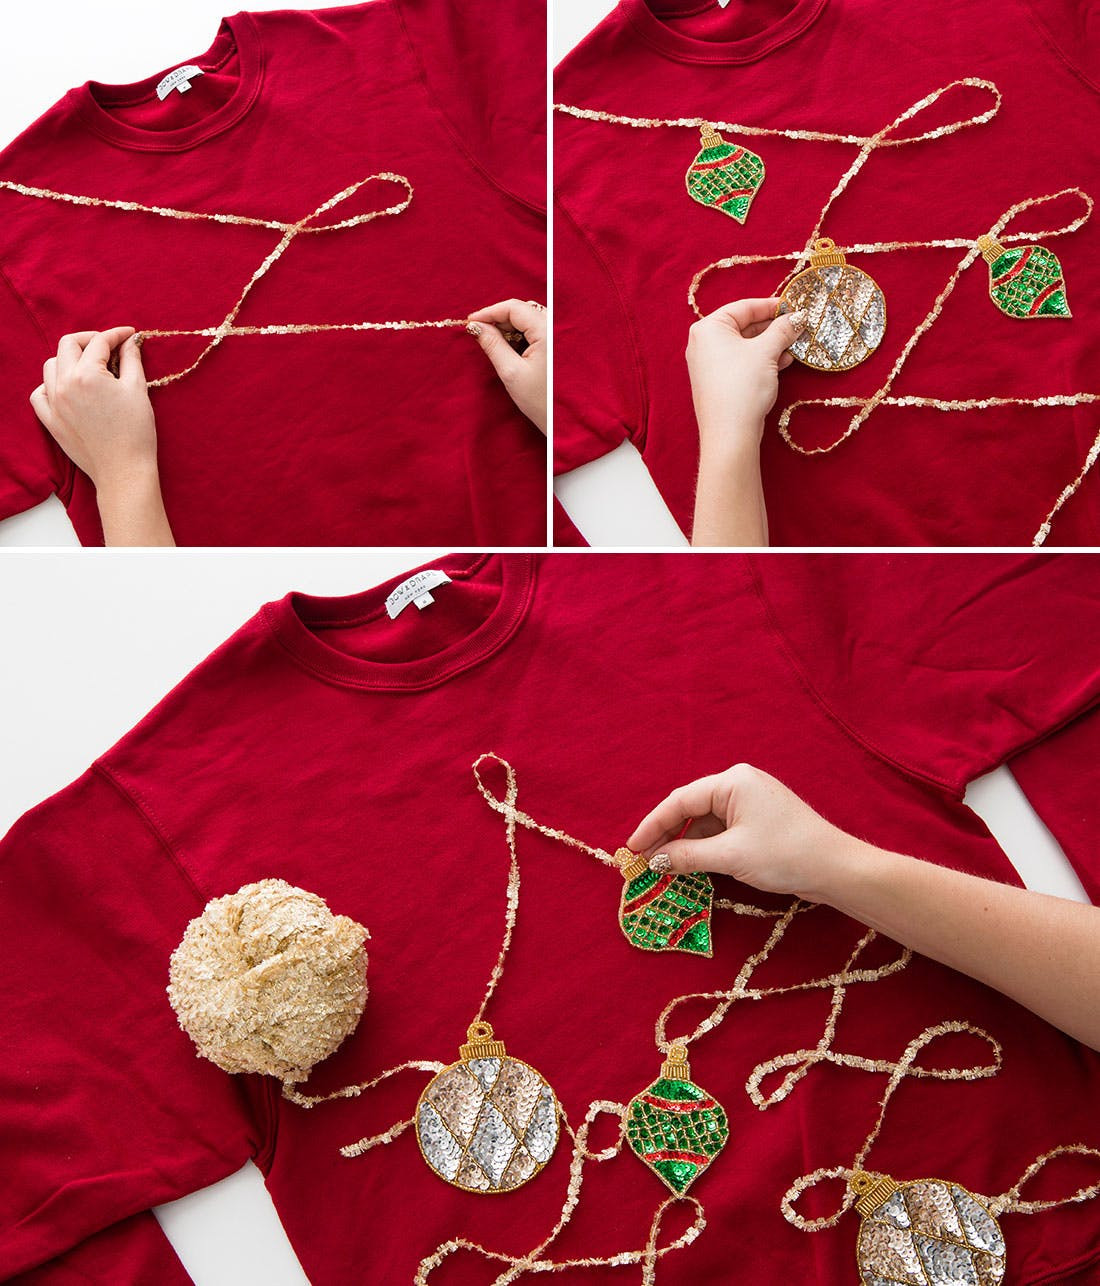 DIY Ugly Christmas Sweater Kits
 Brit Bow & Drape = Our Tacky Holiday Sweater Brit Kit